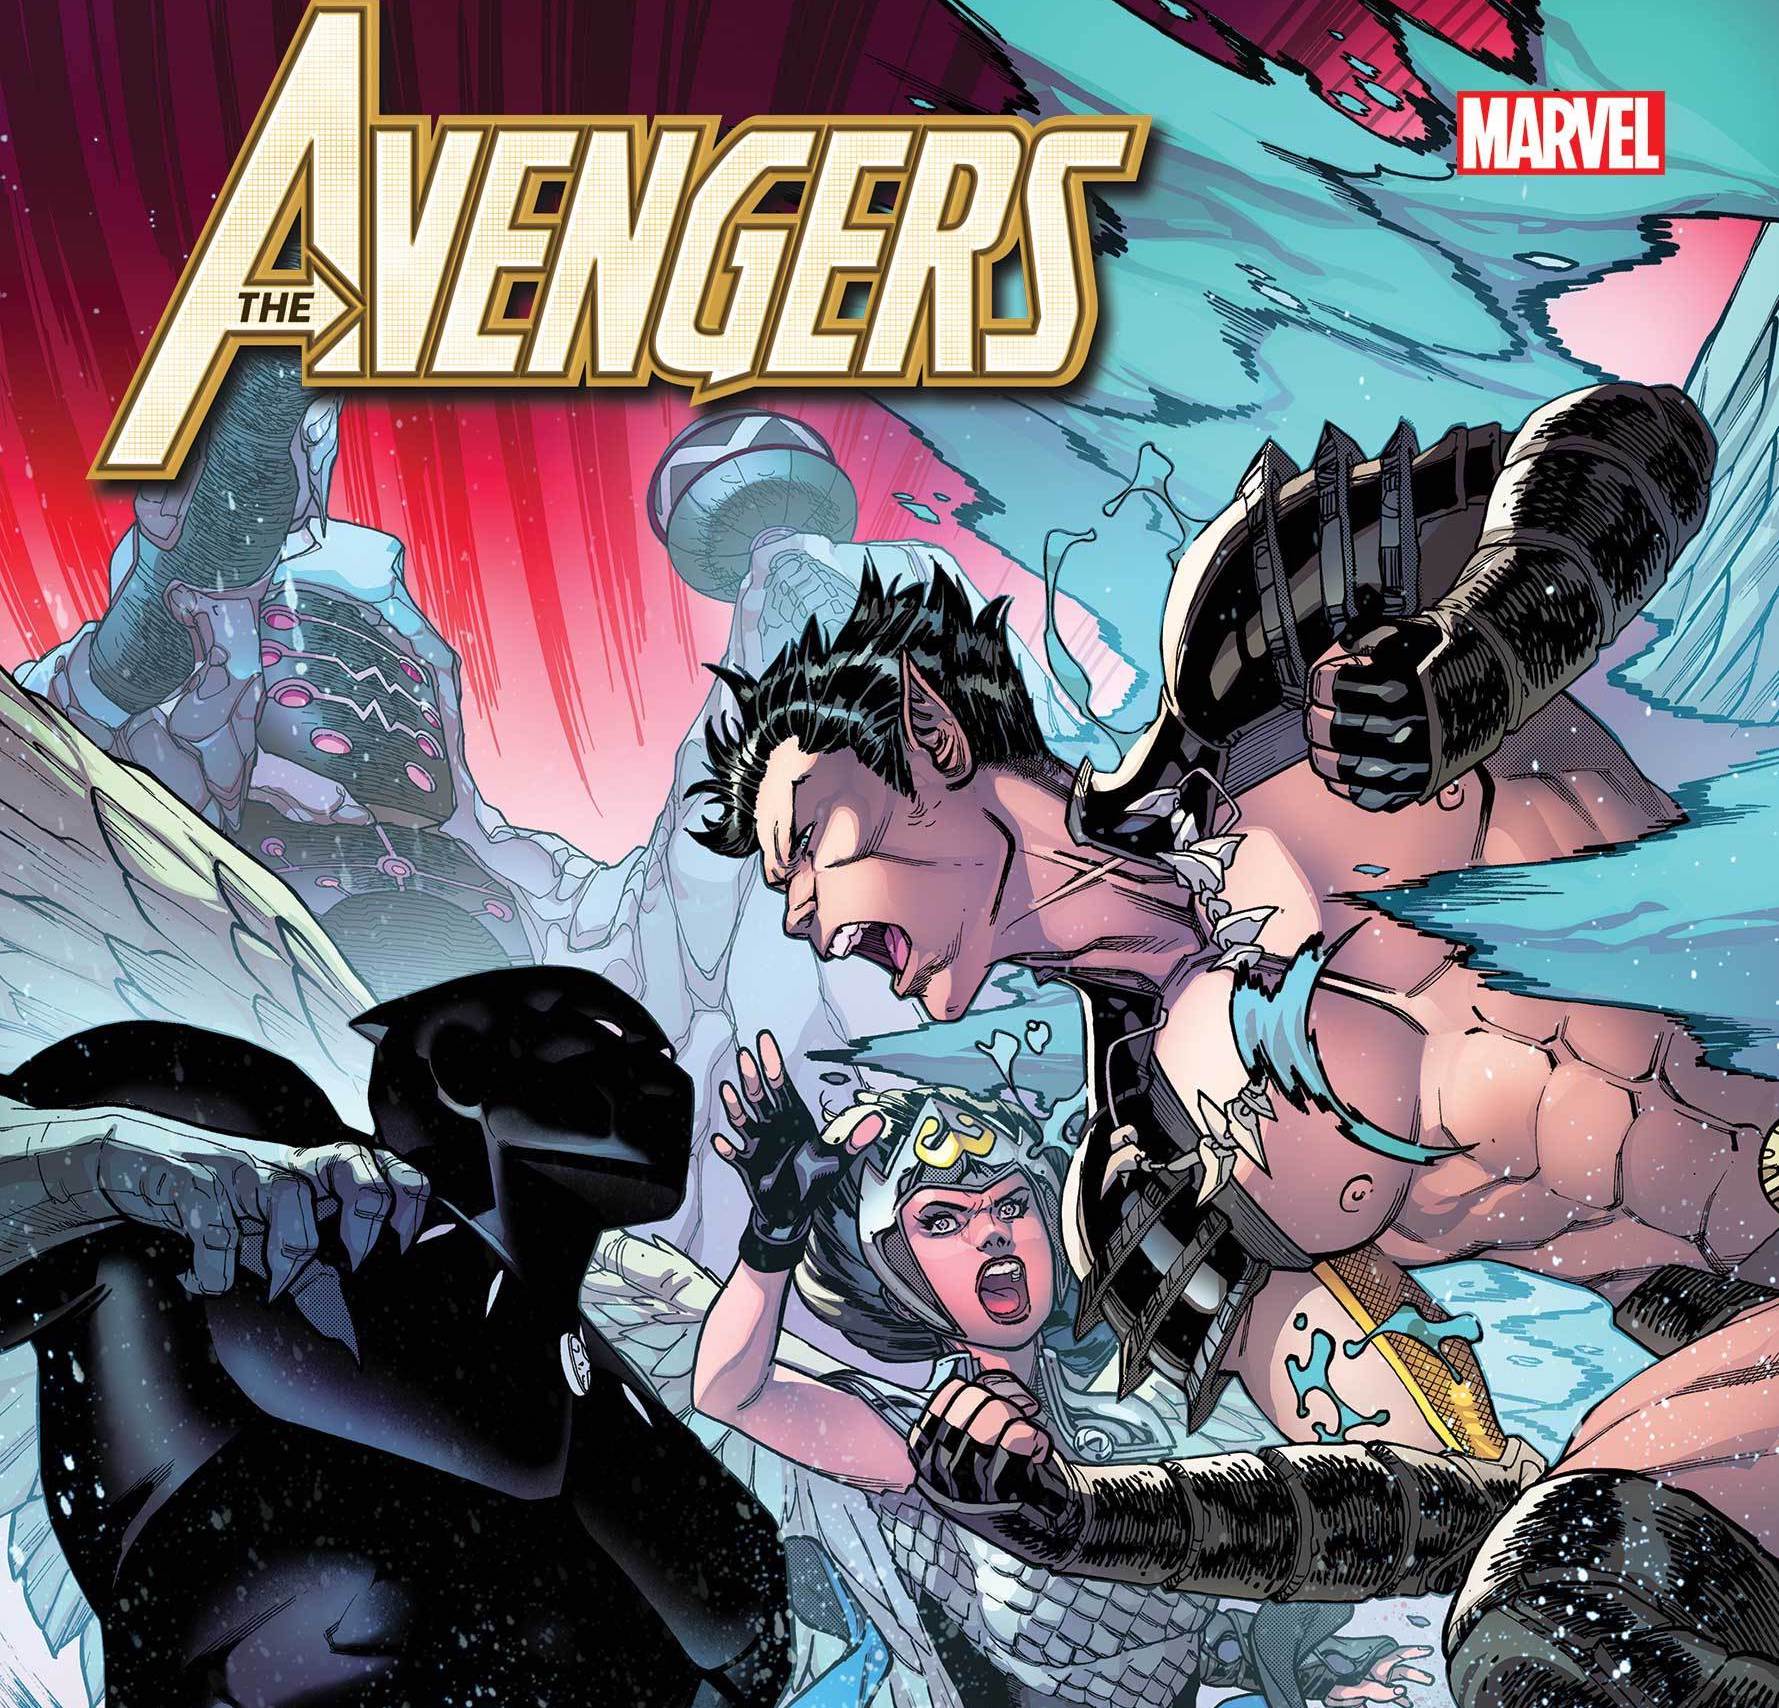 EXCLUSIVE Marvel First Look: Avengers #53 out February 2022